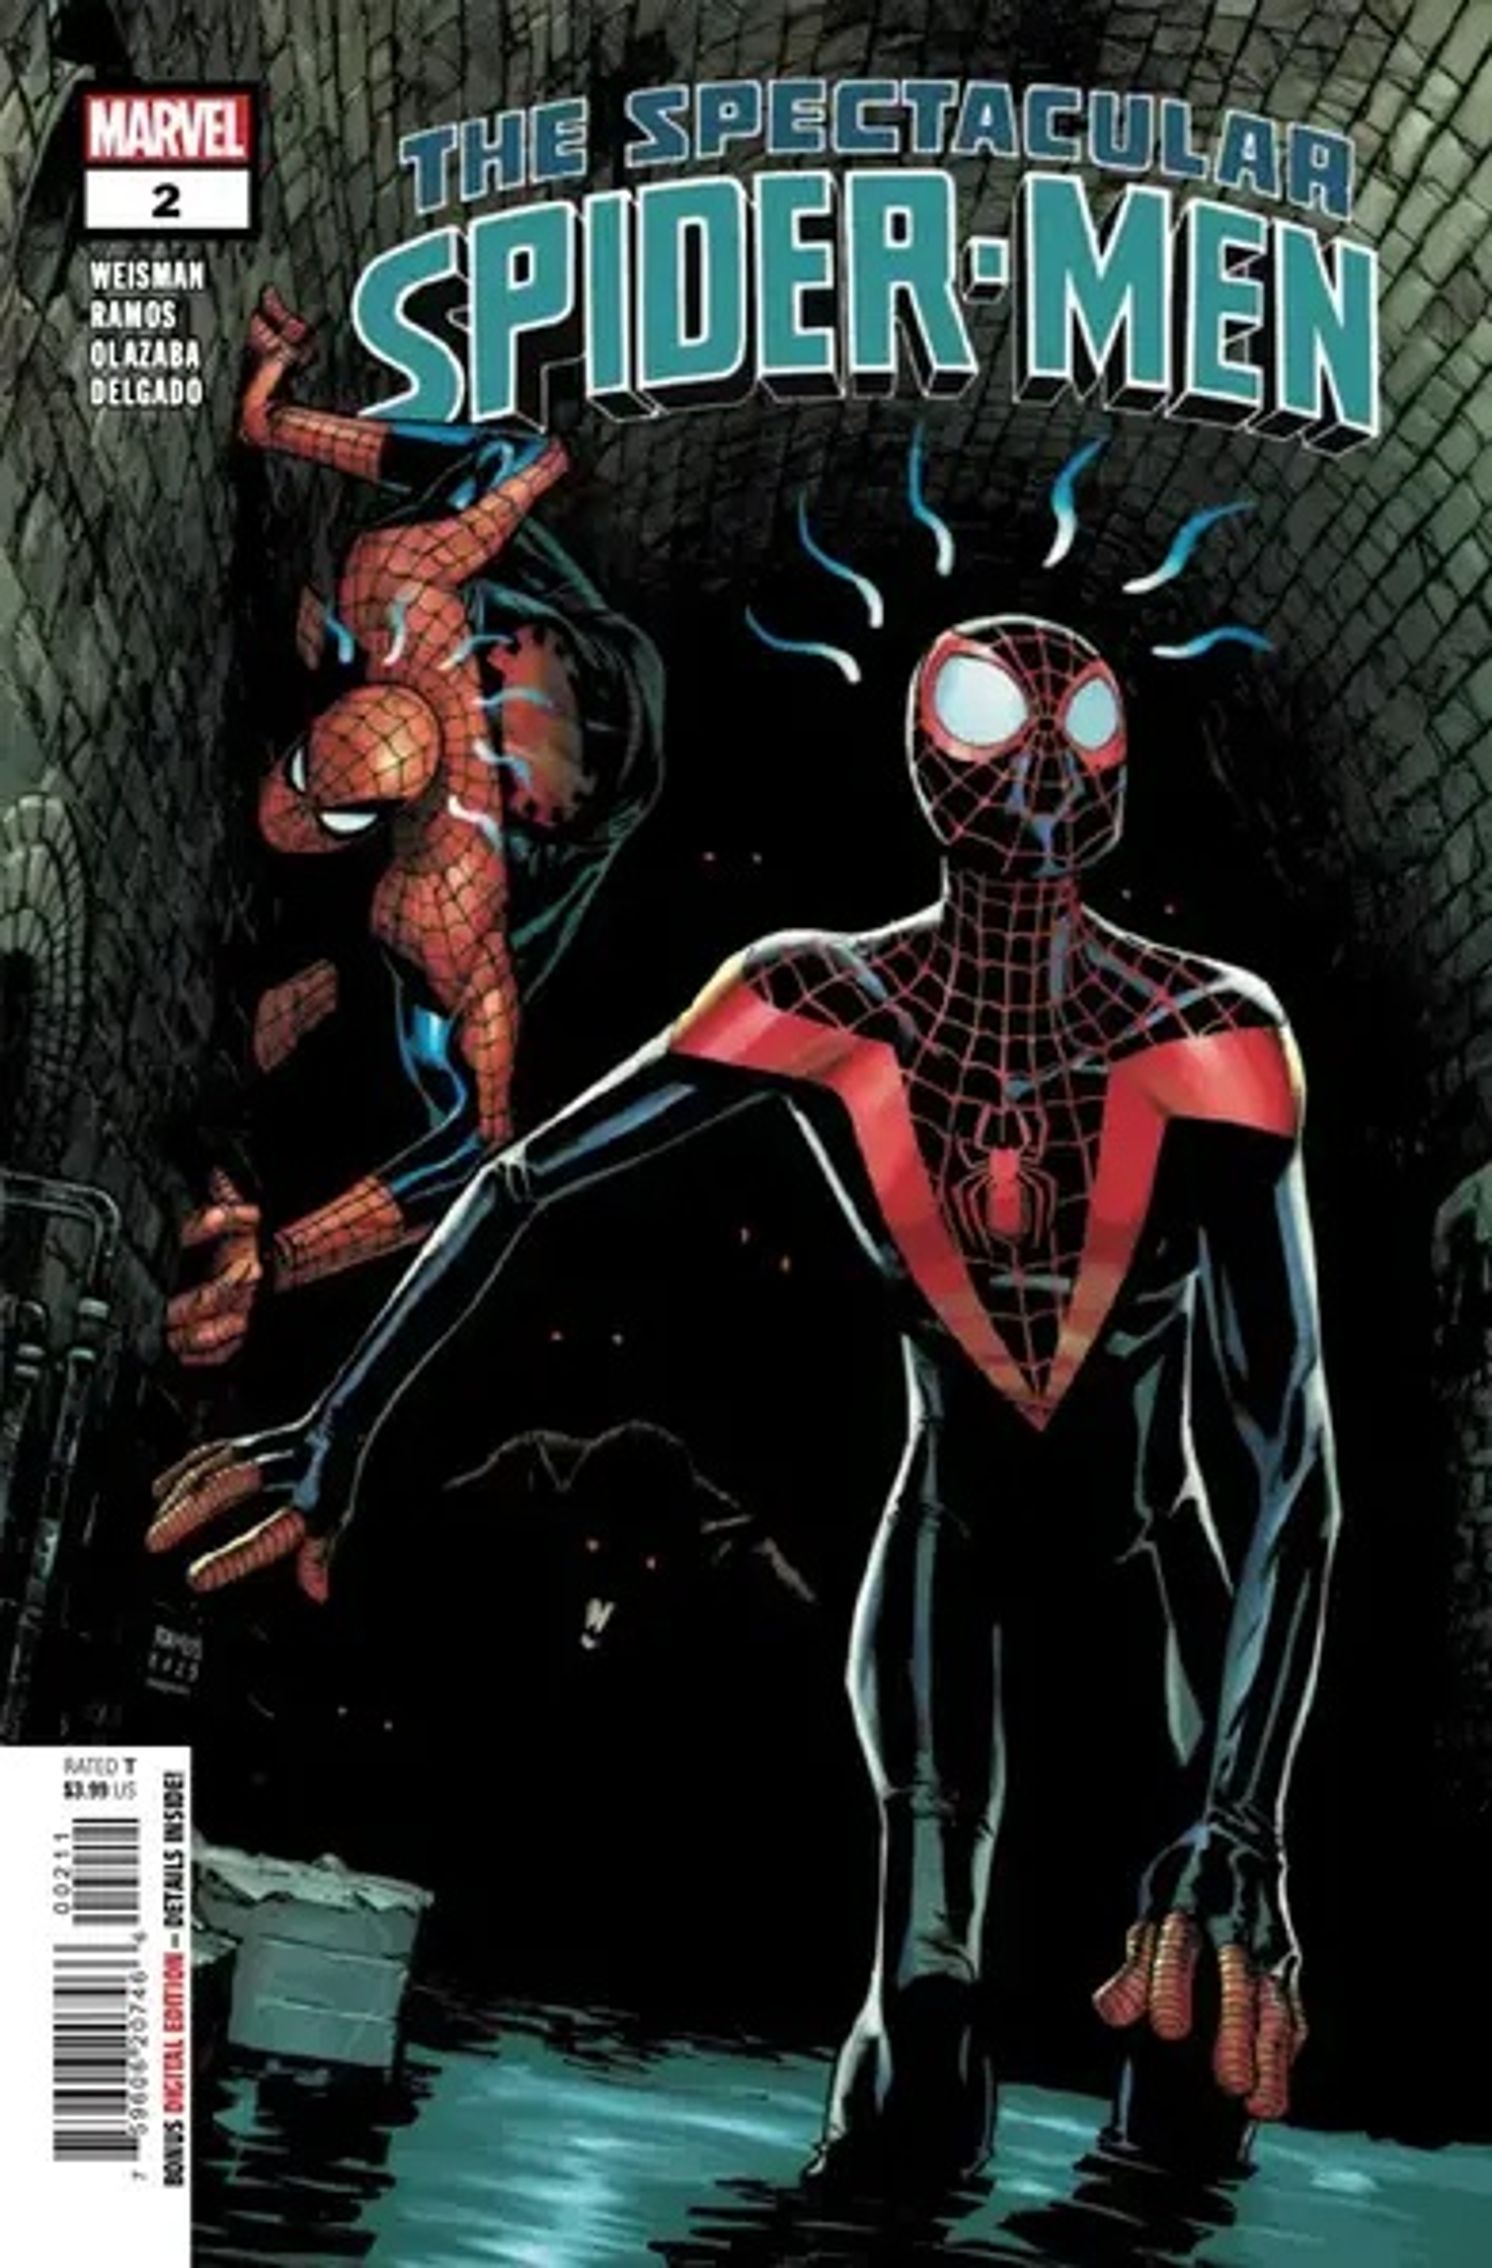 Cover for Spectacular Spider-Man #2, Miles & Peter in the sewers, both their Spider-senses going off.